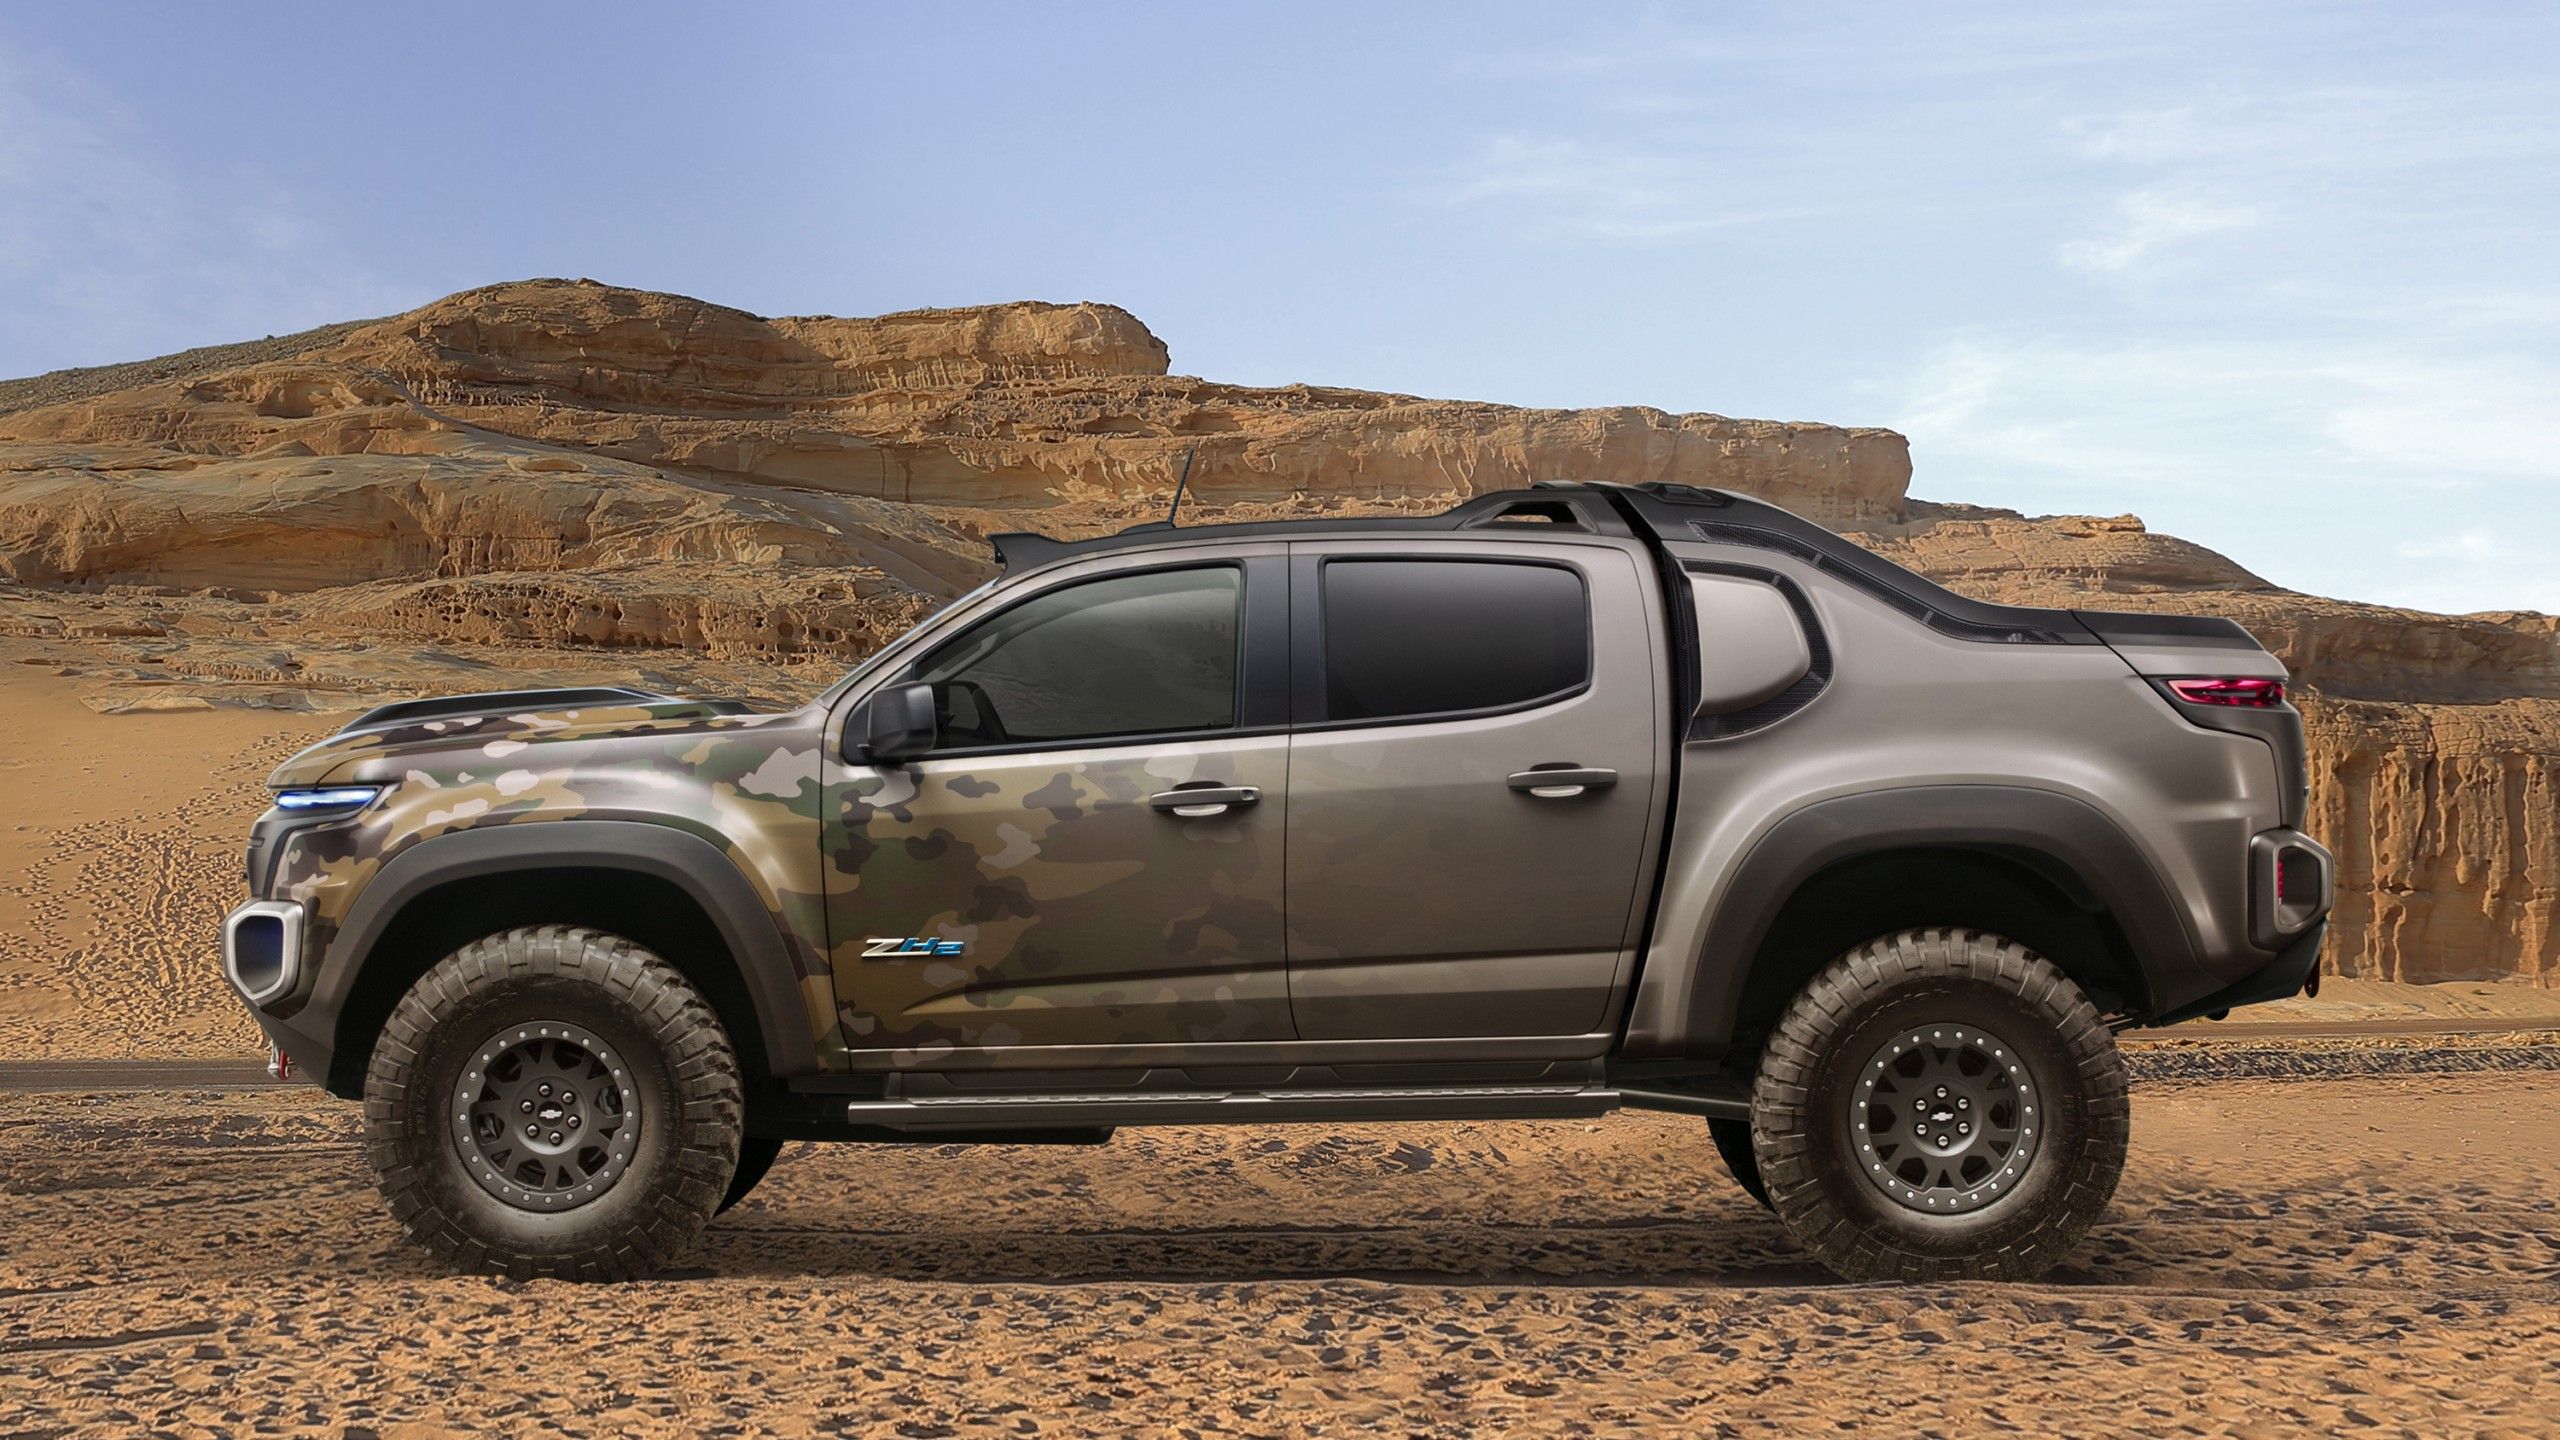 Wallpaper Chevrolet Colorado ZH Electric cars, U.S. Army, Vehicle, Military